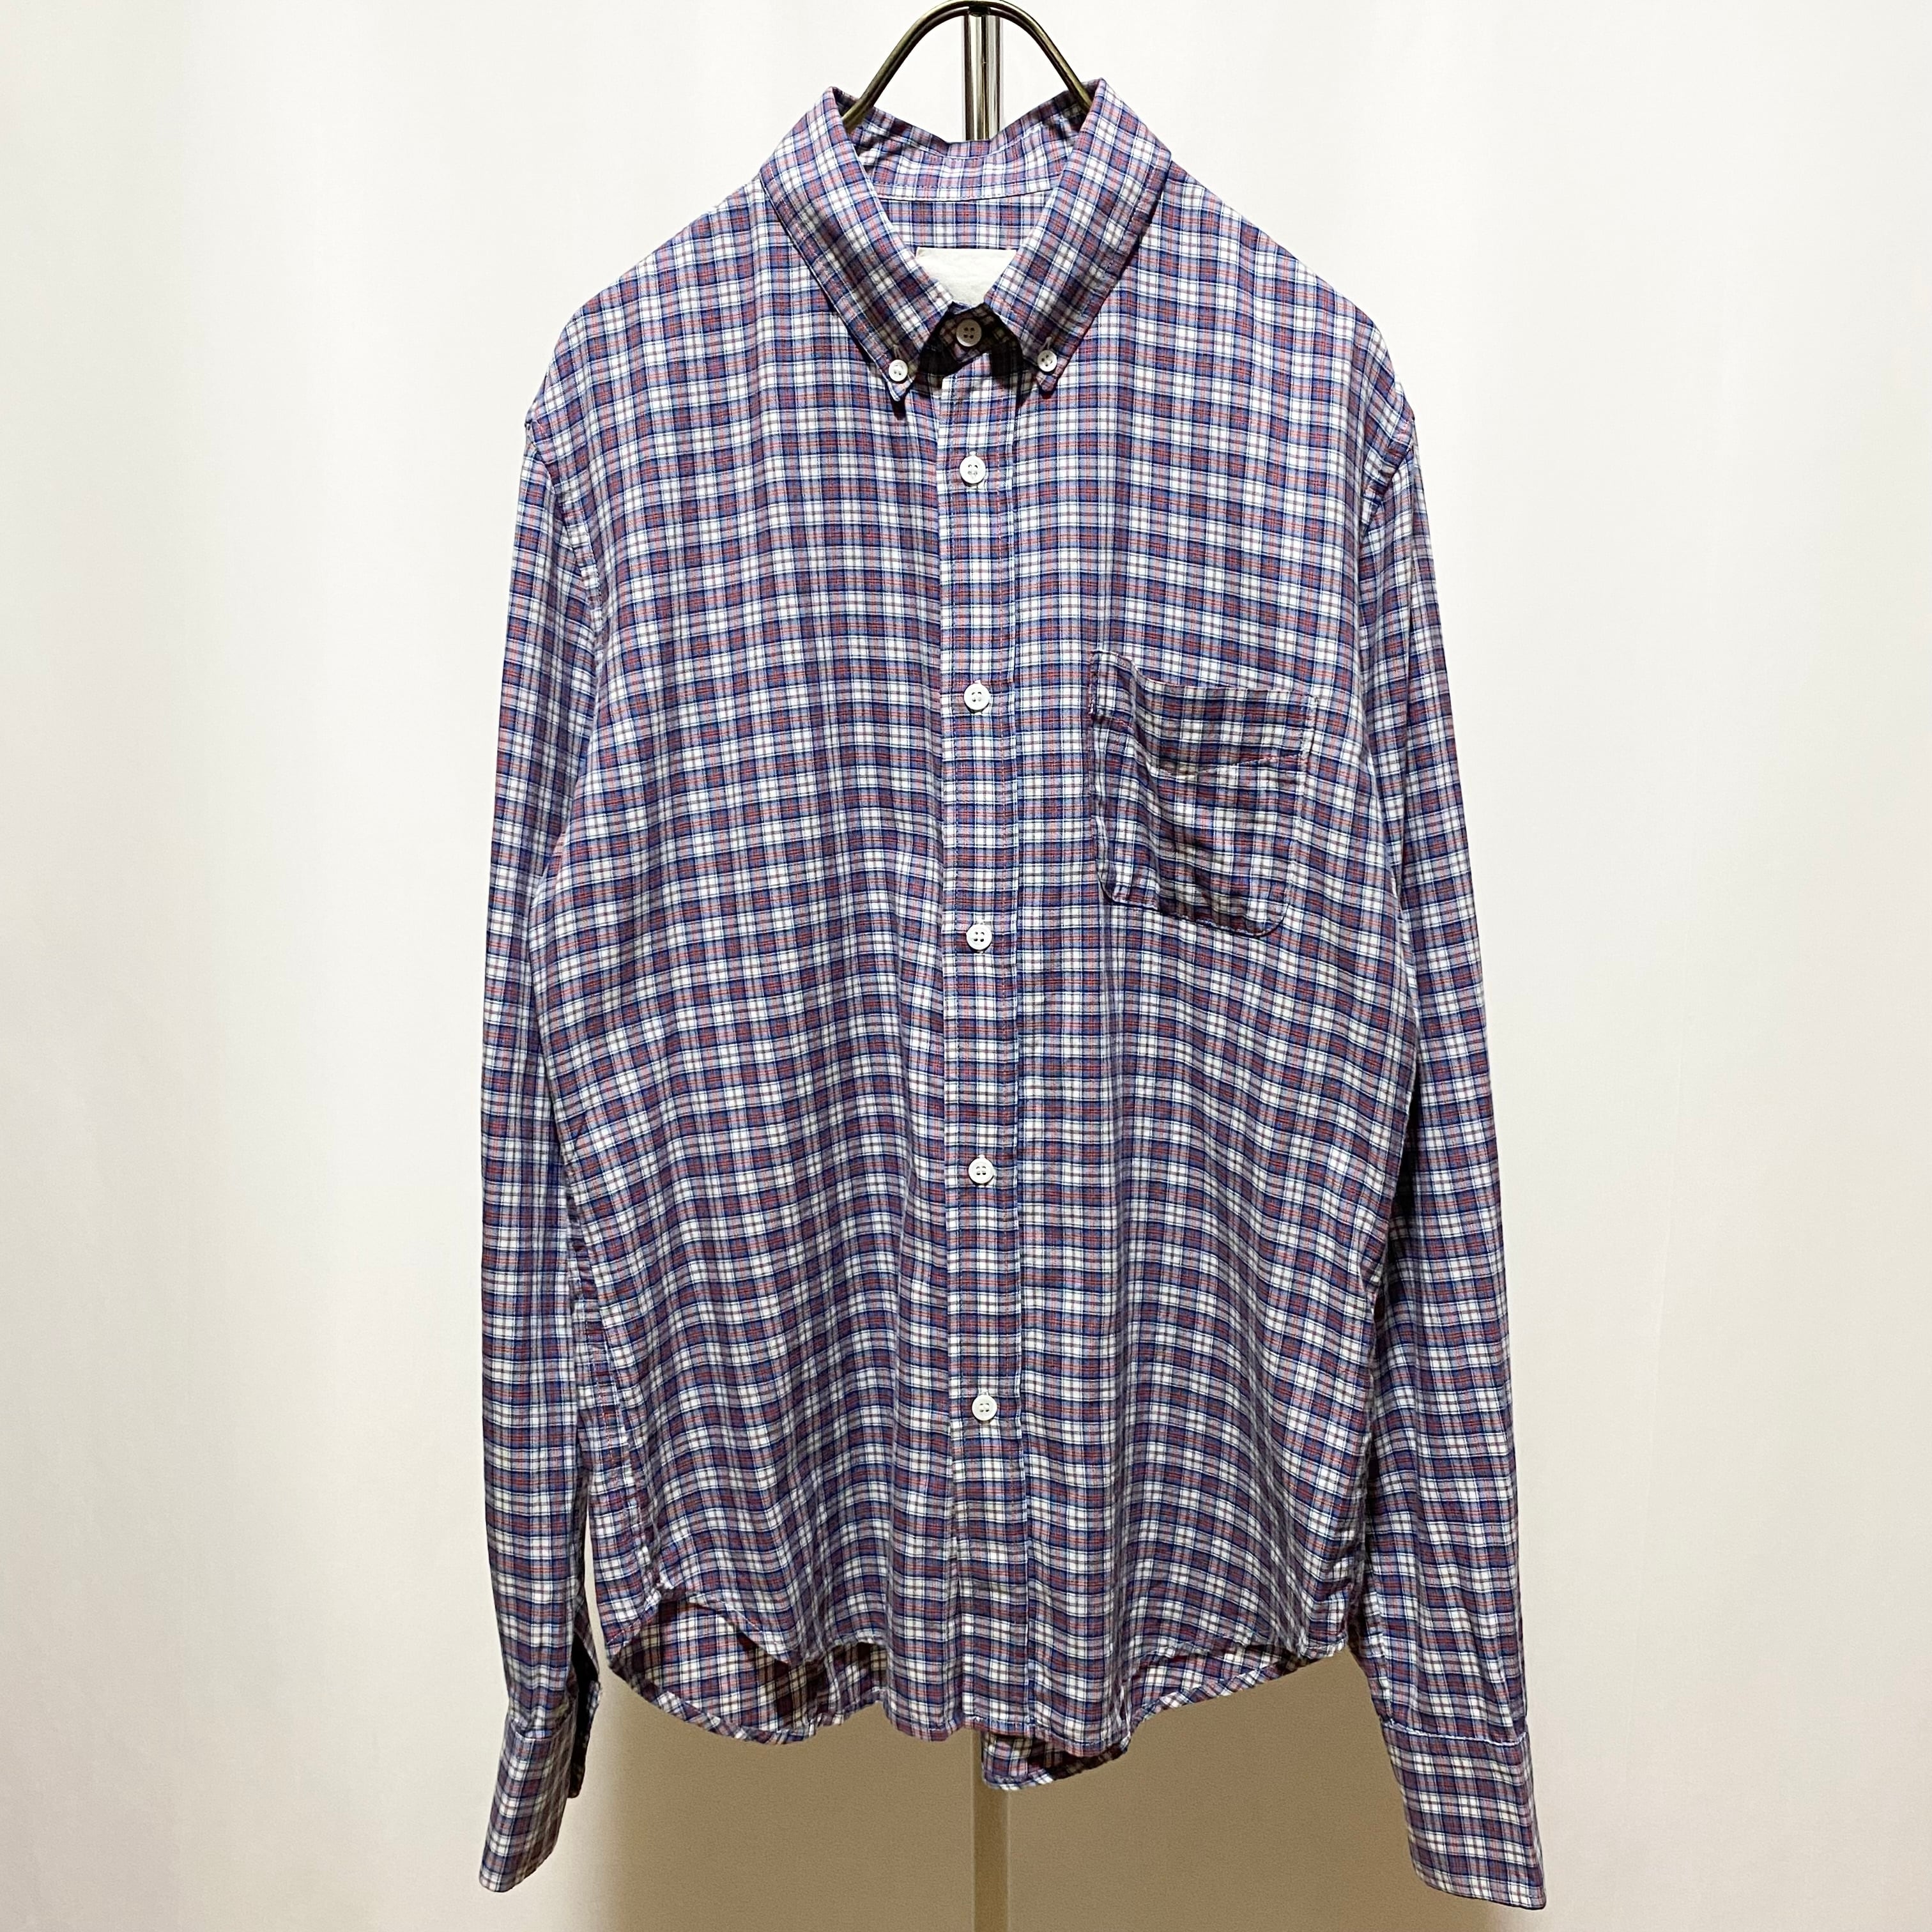 Band of Outsiders CHK B.D Shirt Blue Made in USA | IDLS Online